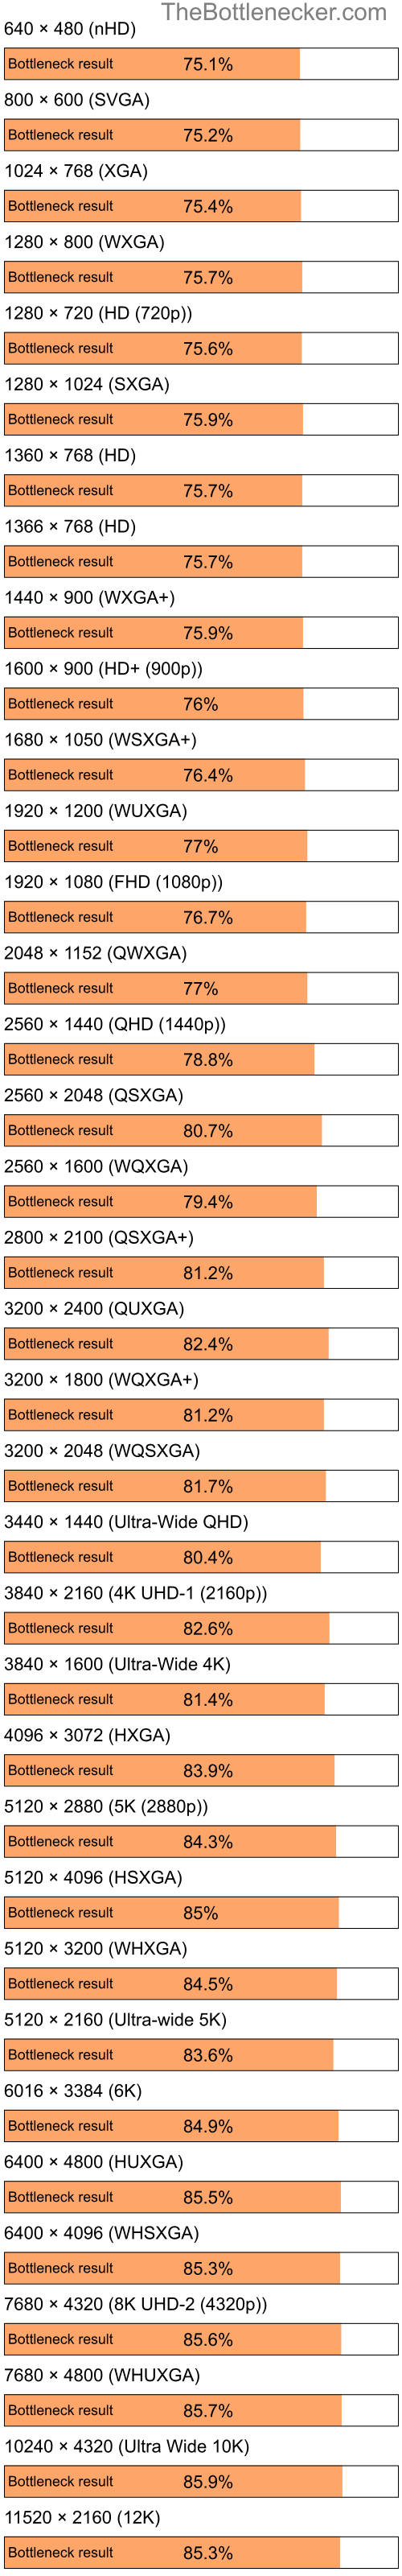 Bottleneck results by resolution for Intel Atom Z520 and AMD Radeon 9500 9700 in7 Days to Die